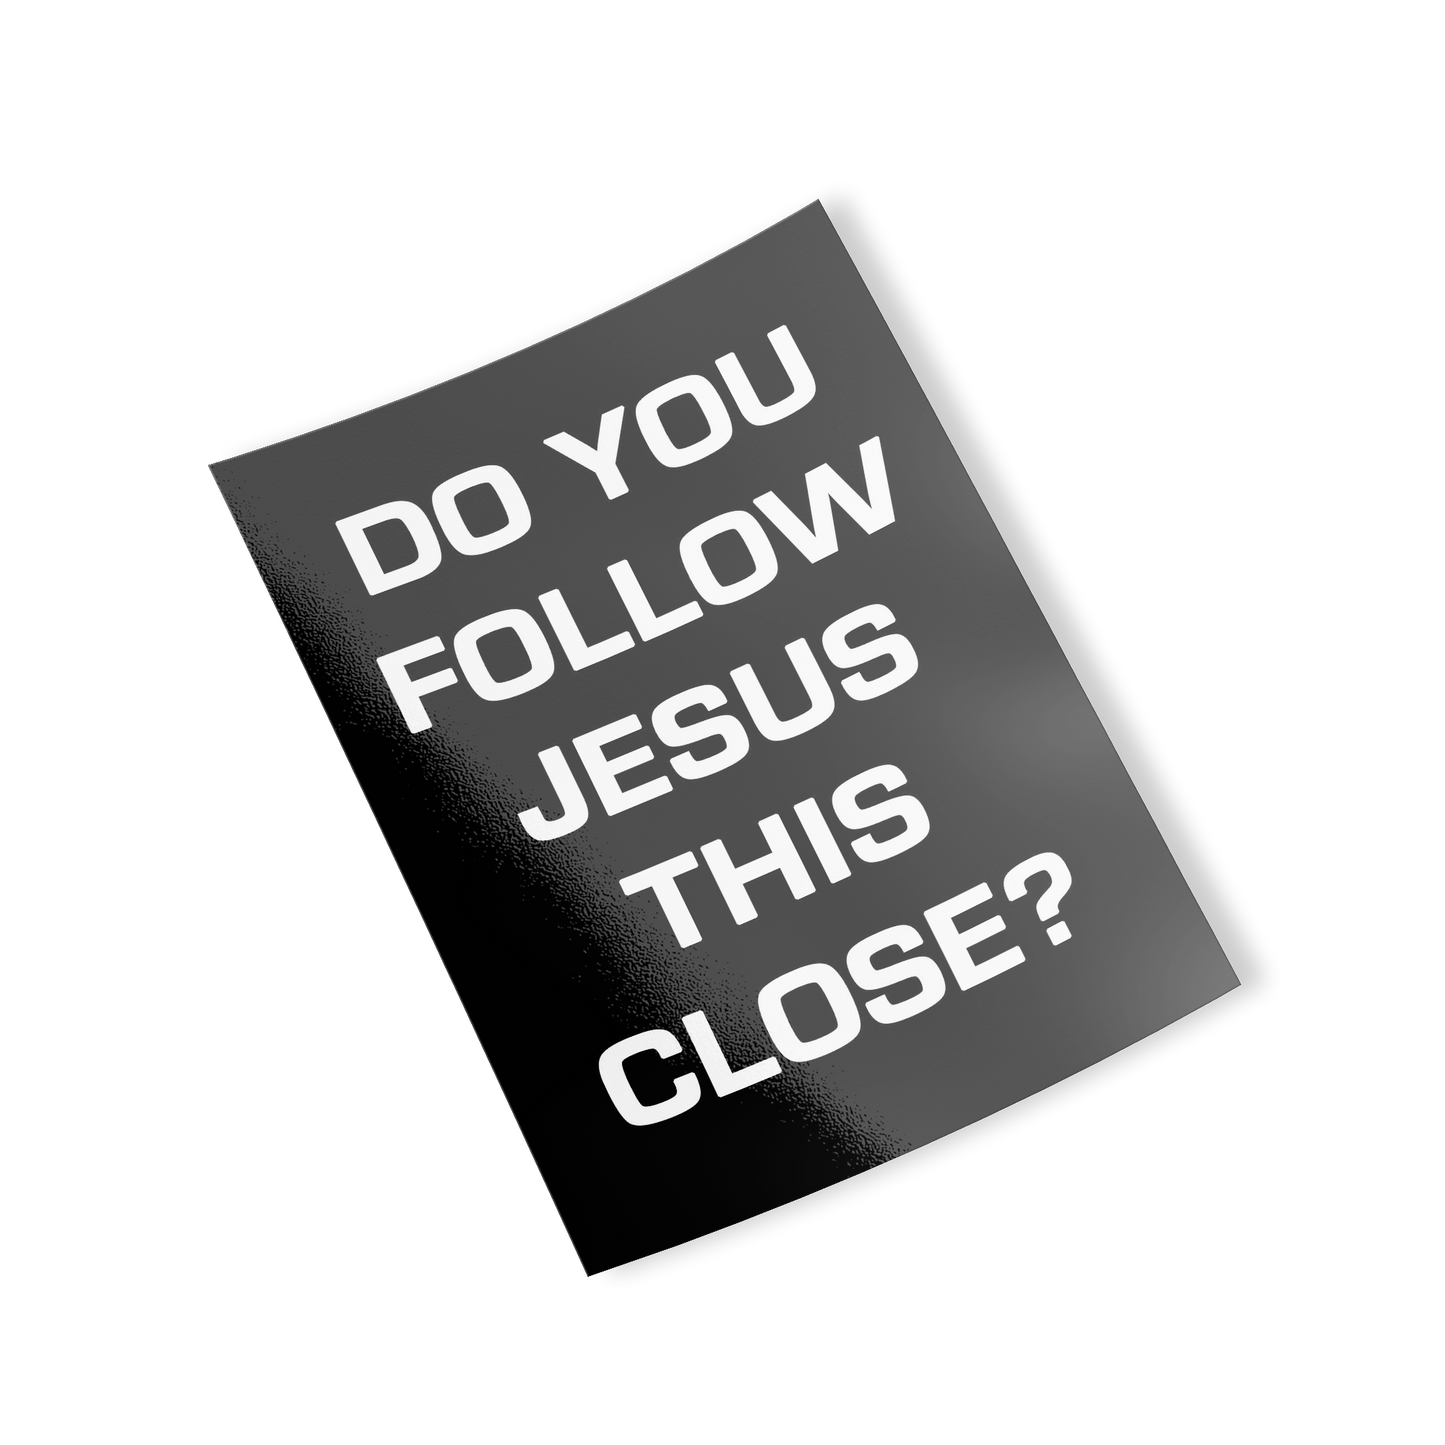 Do You Follow Jesus This Close Bumper Sticker Vertical Card Layout floating